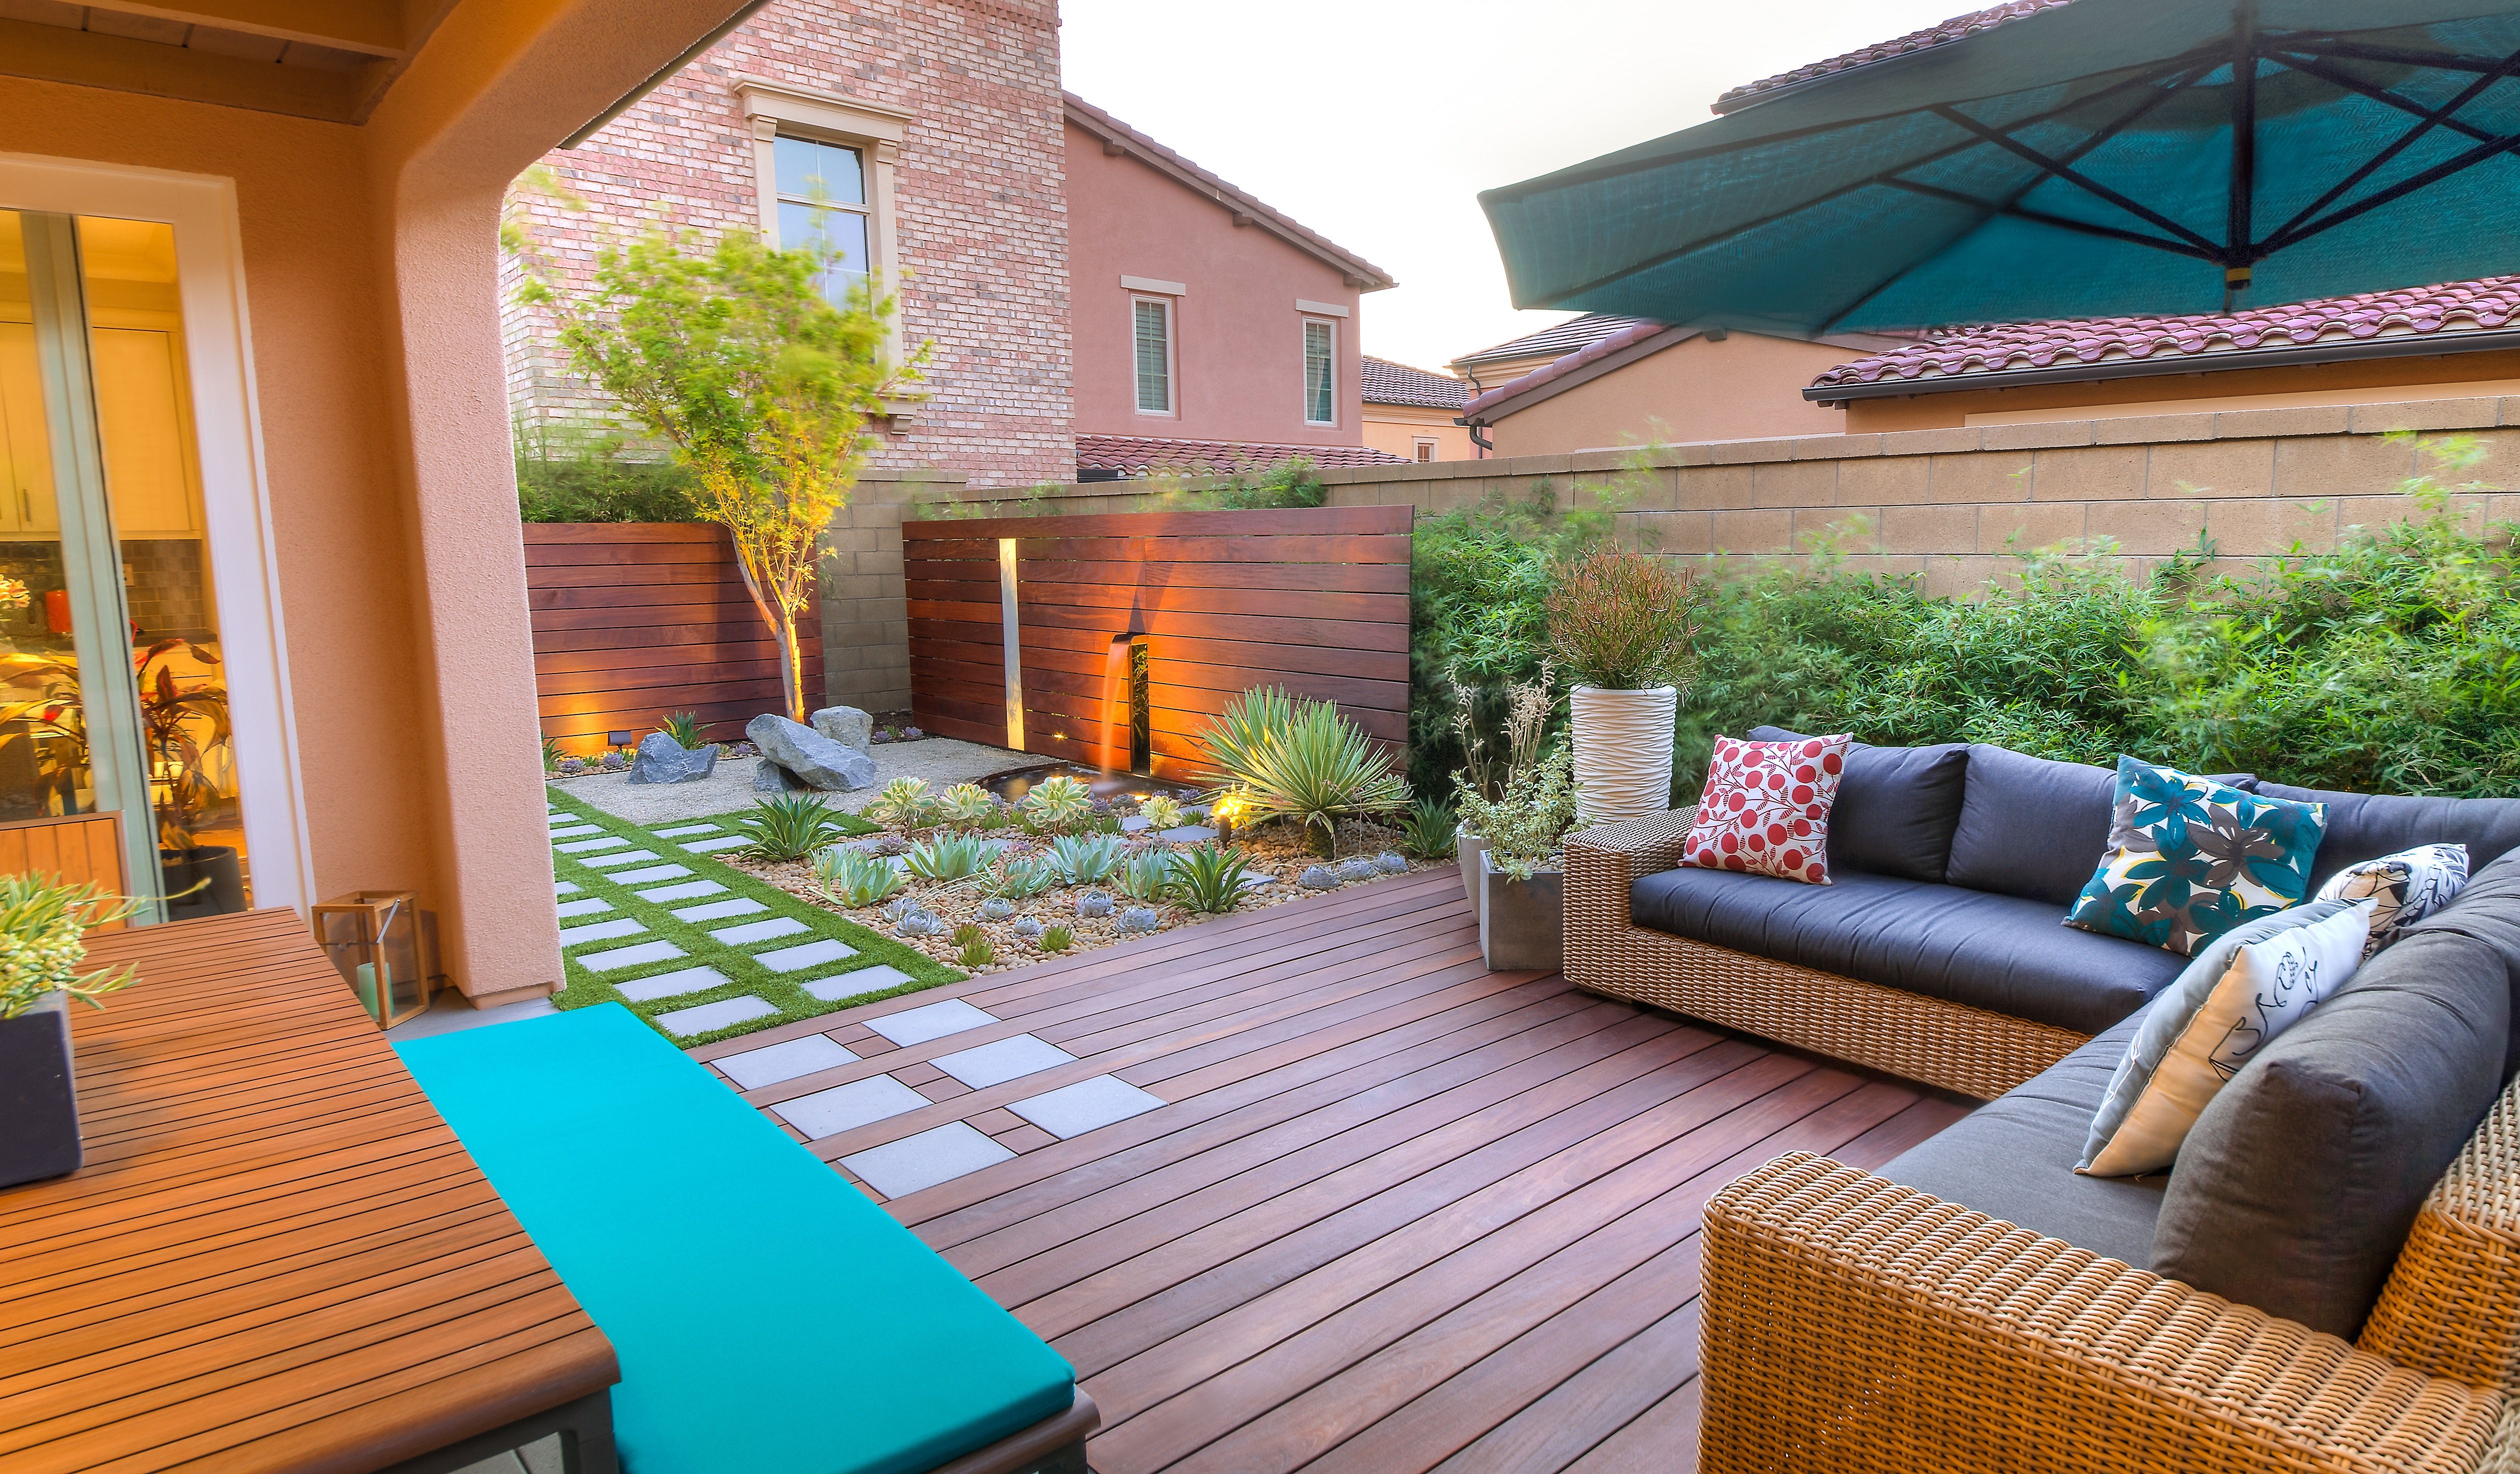 Featured Photo of Contemporary Garden Design With Elegant Look